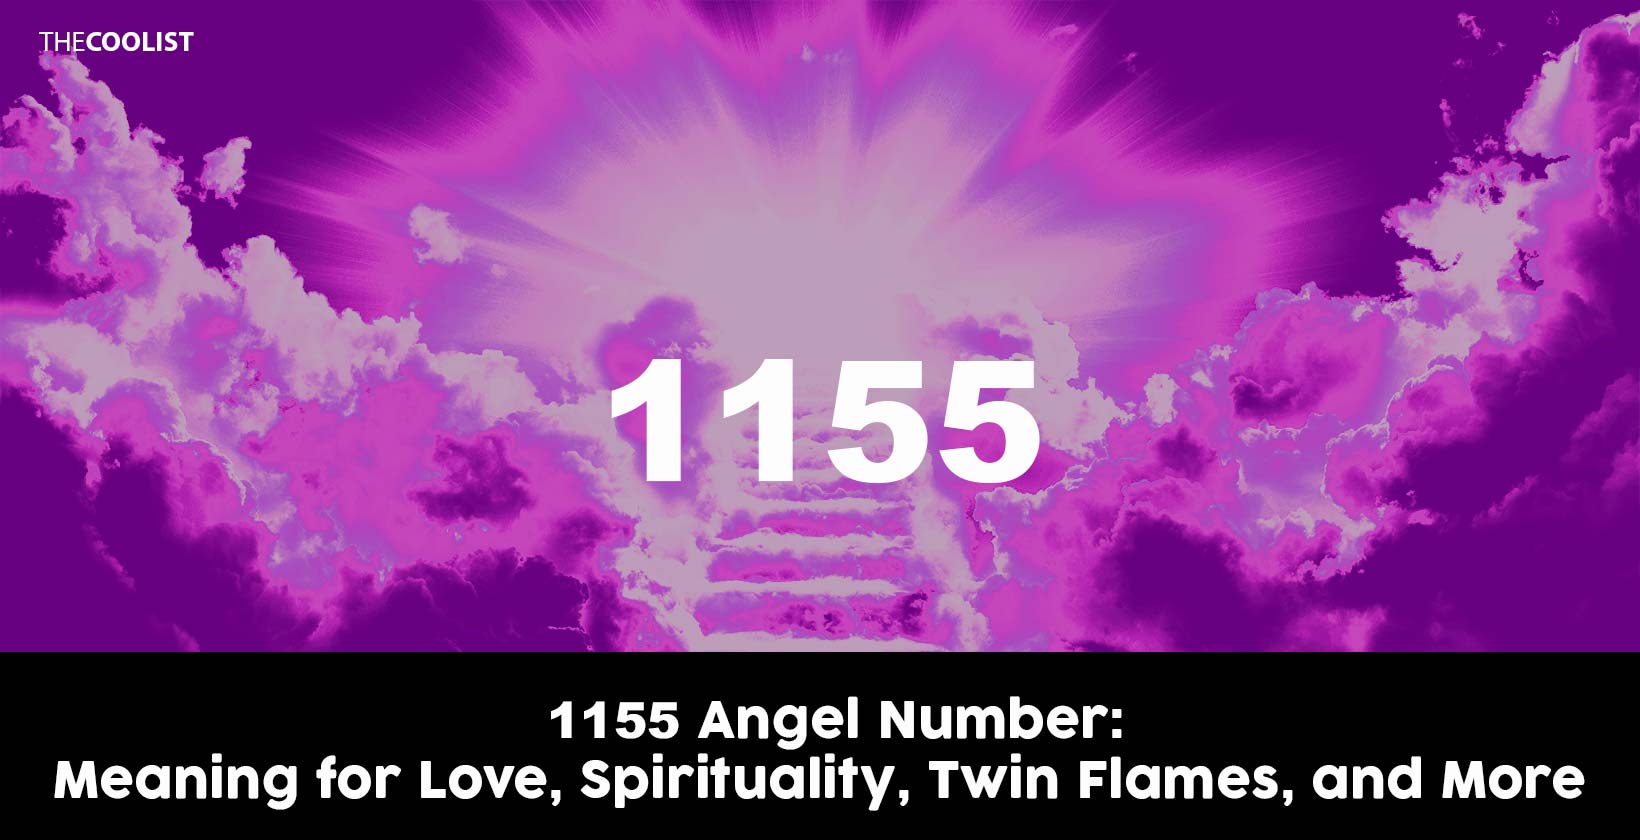 1155 Angel Number: Meaning for Love, Spirituality, Twin Flames, and More